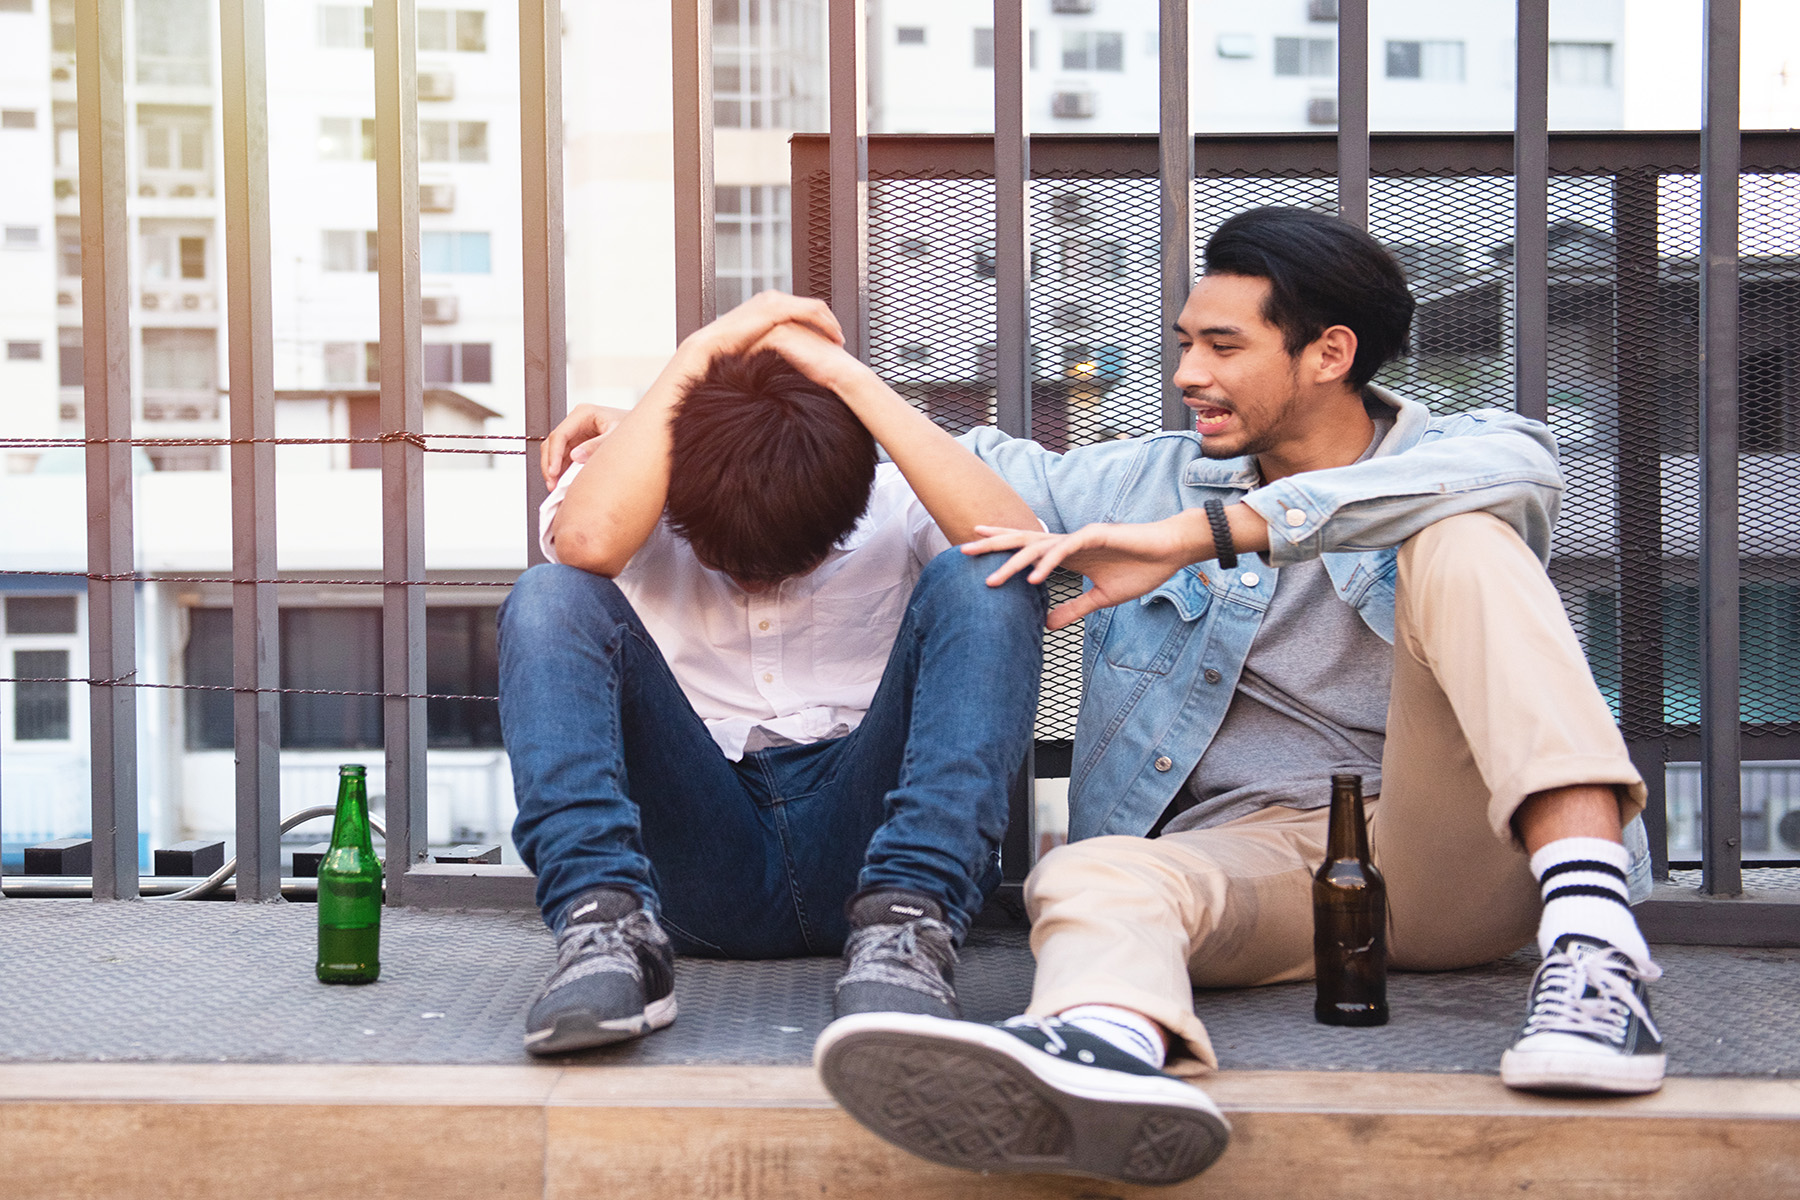 Two guys sitting on the street drinking beer, one has his head in his hands, the other has his arm around his shoulders

